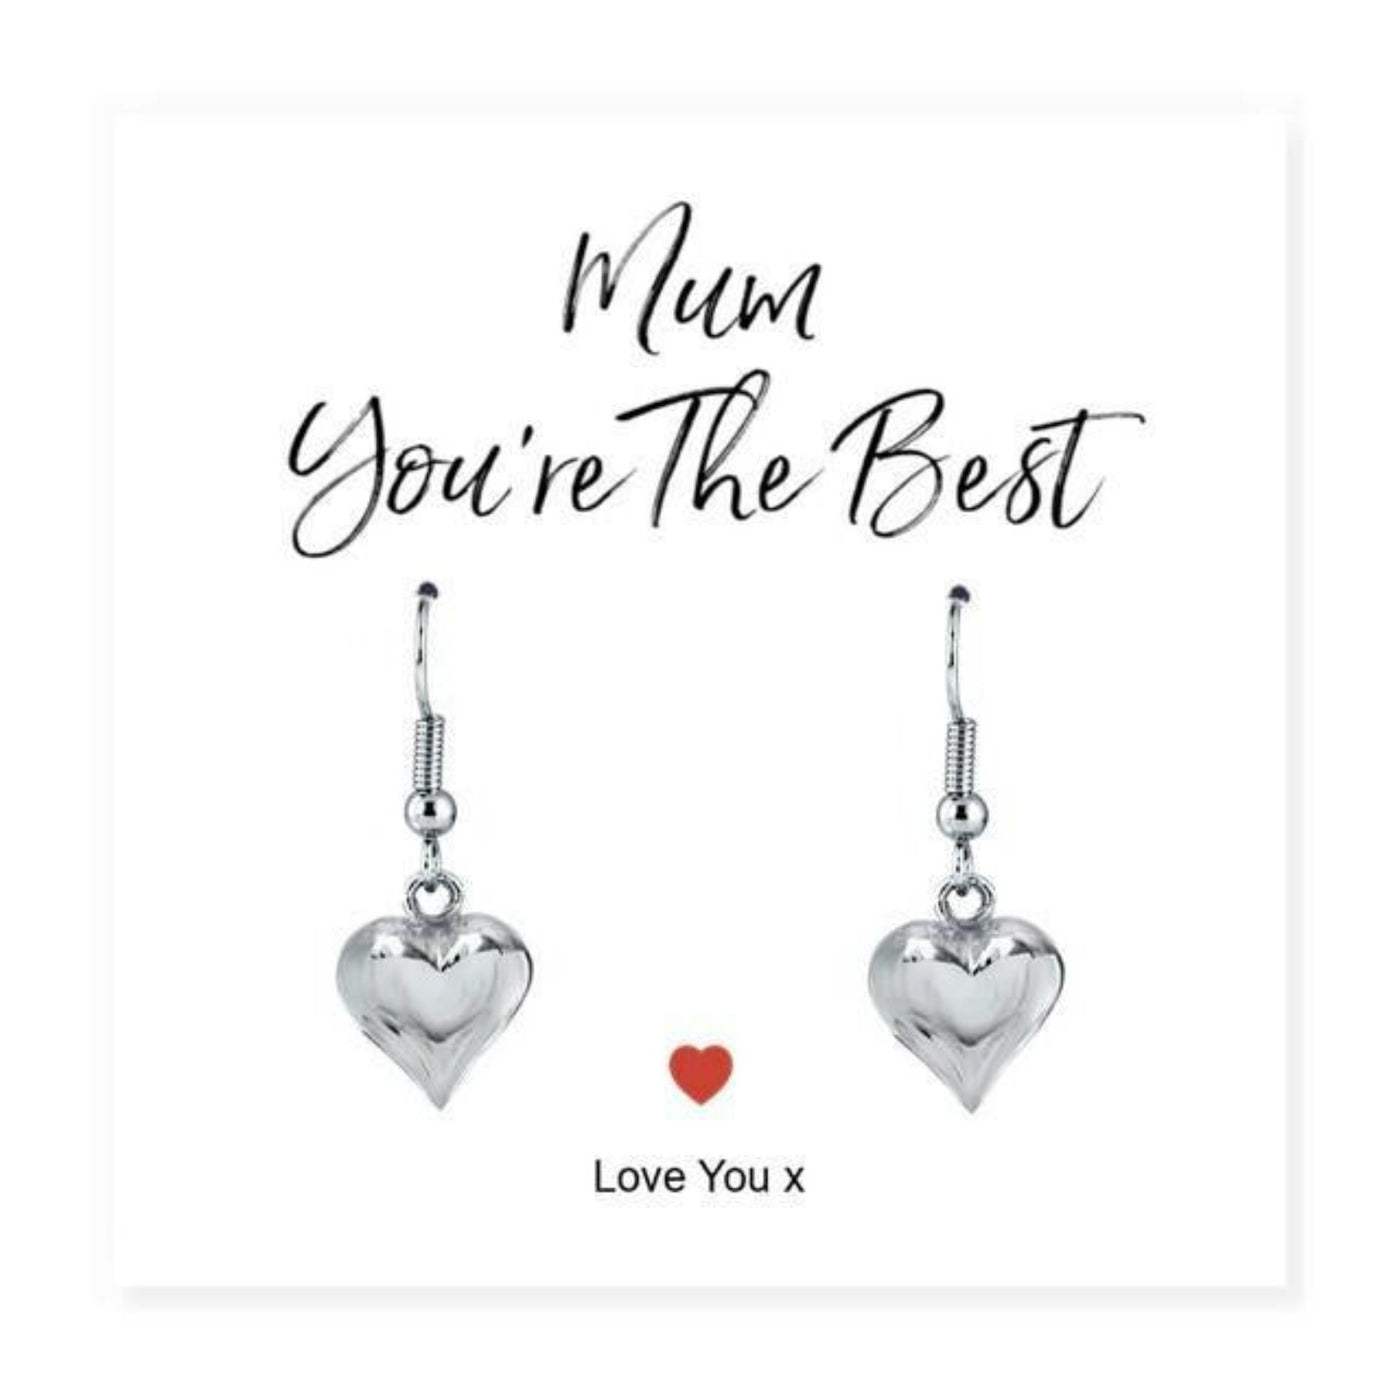 Mum You're The Best Silver Plated Heart Earrings And Message Card.